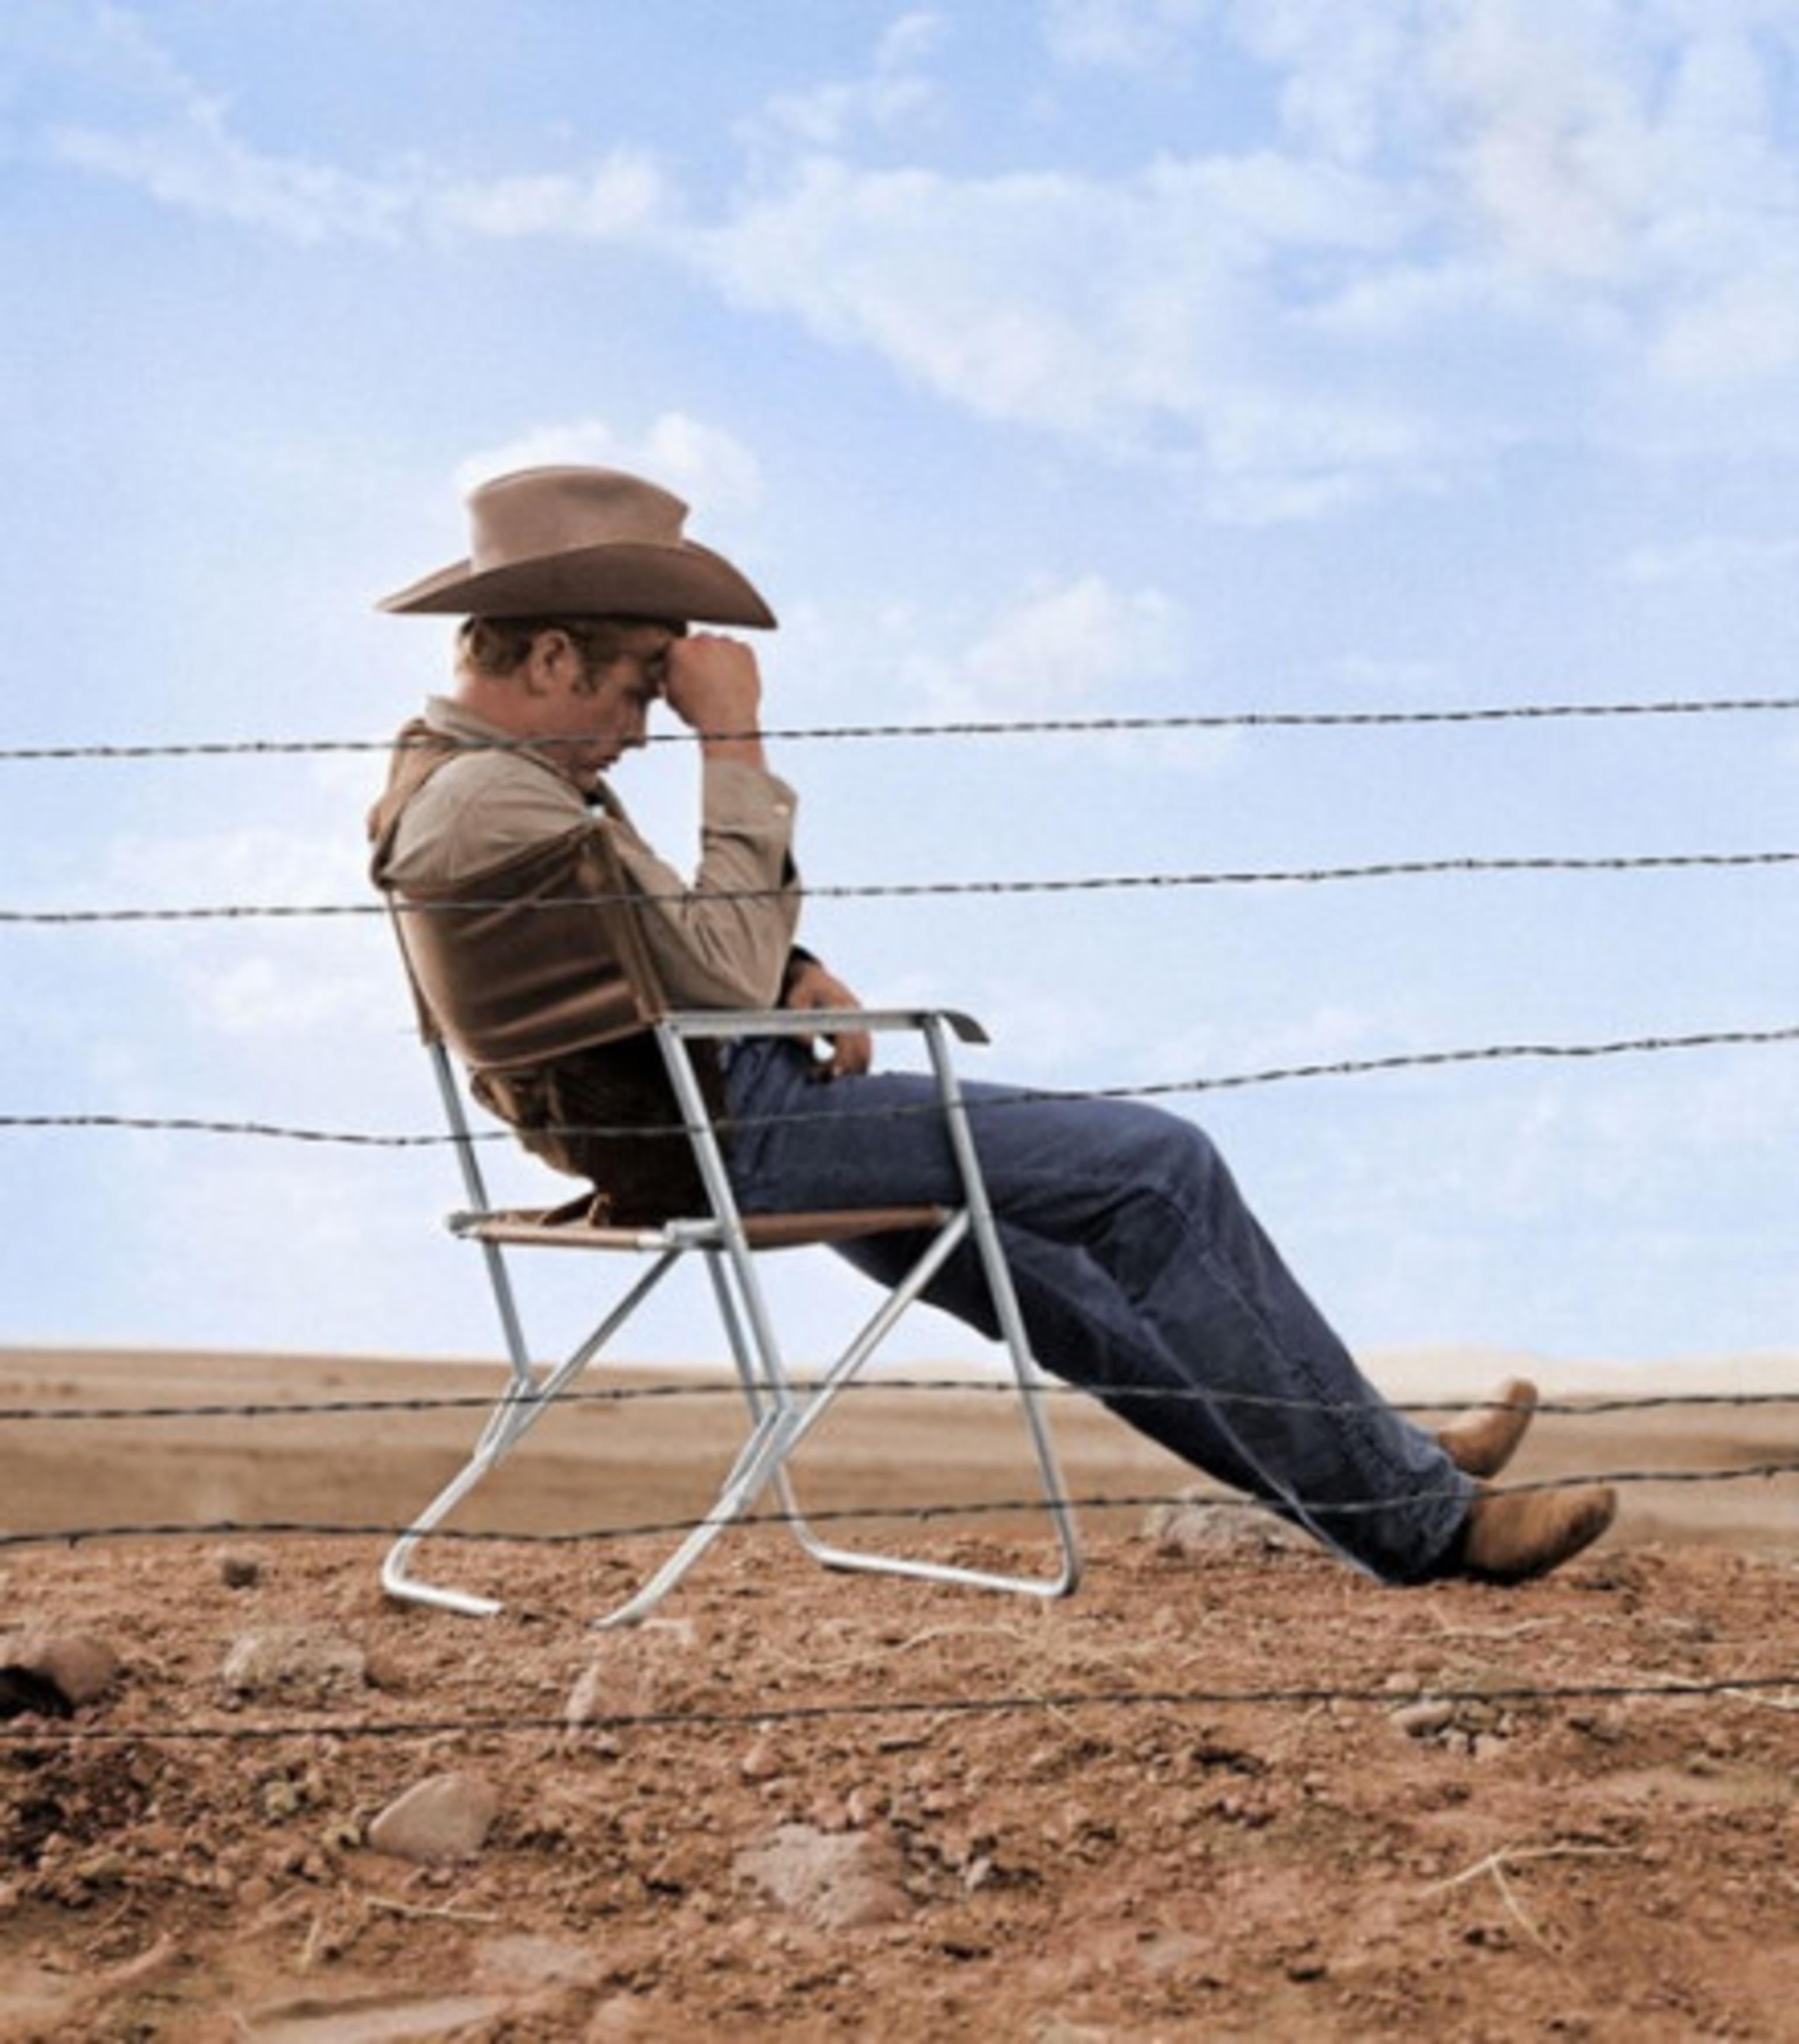 James Dean seated - Photograph by Frank Worth